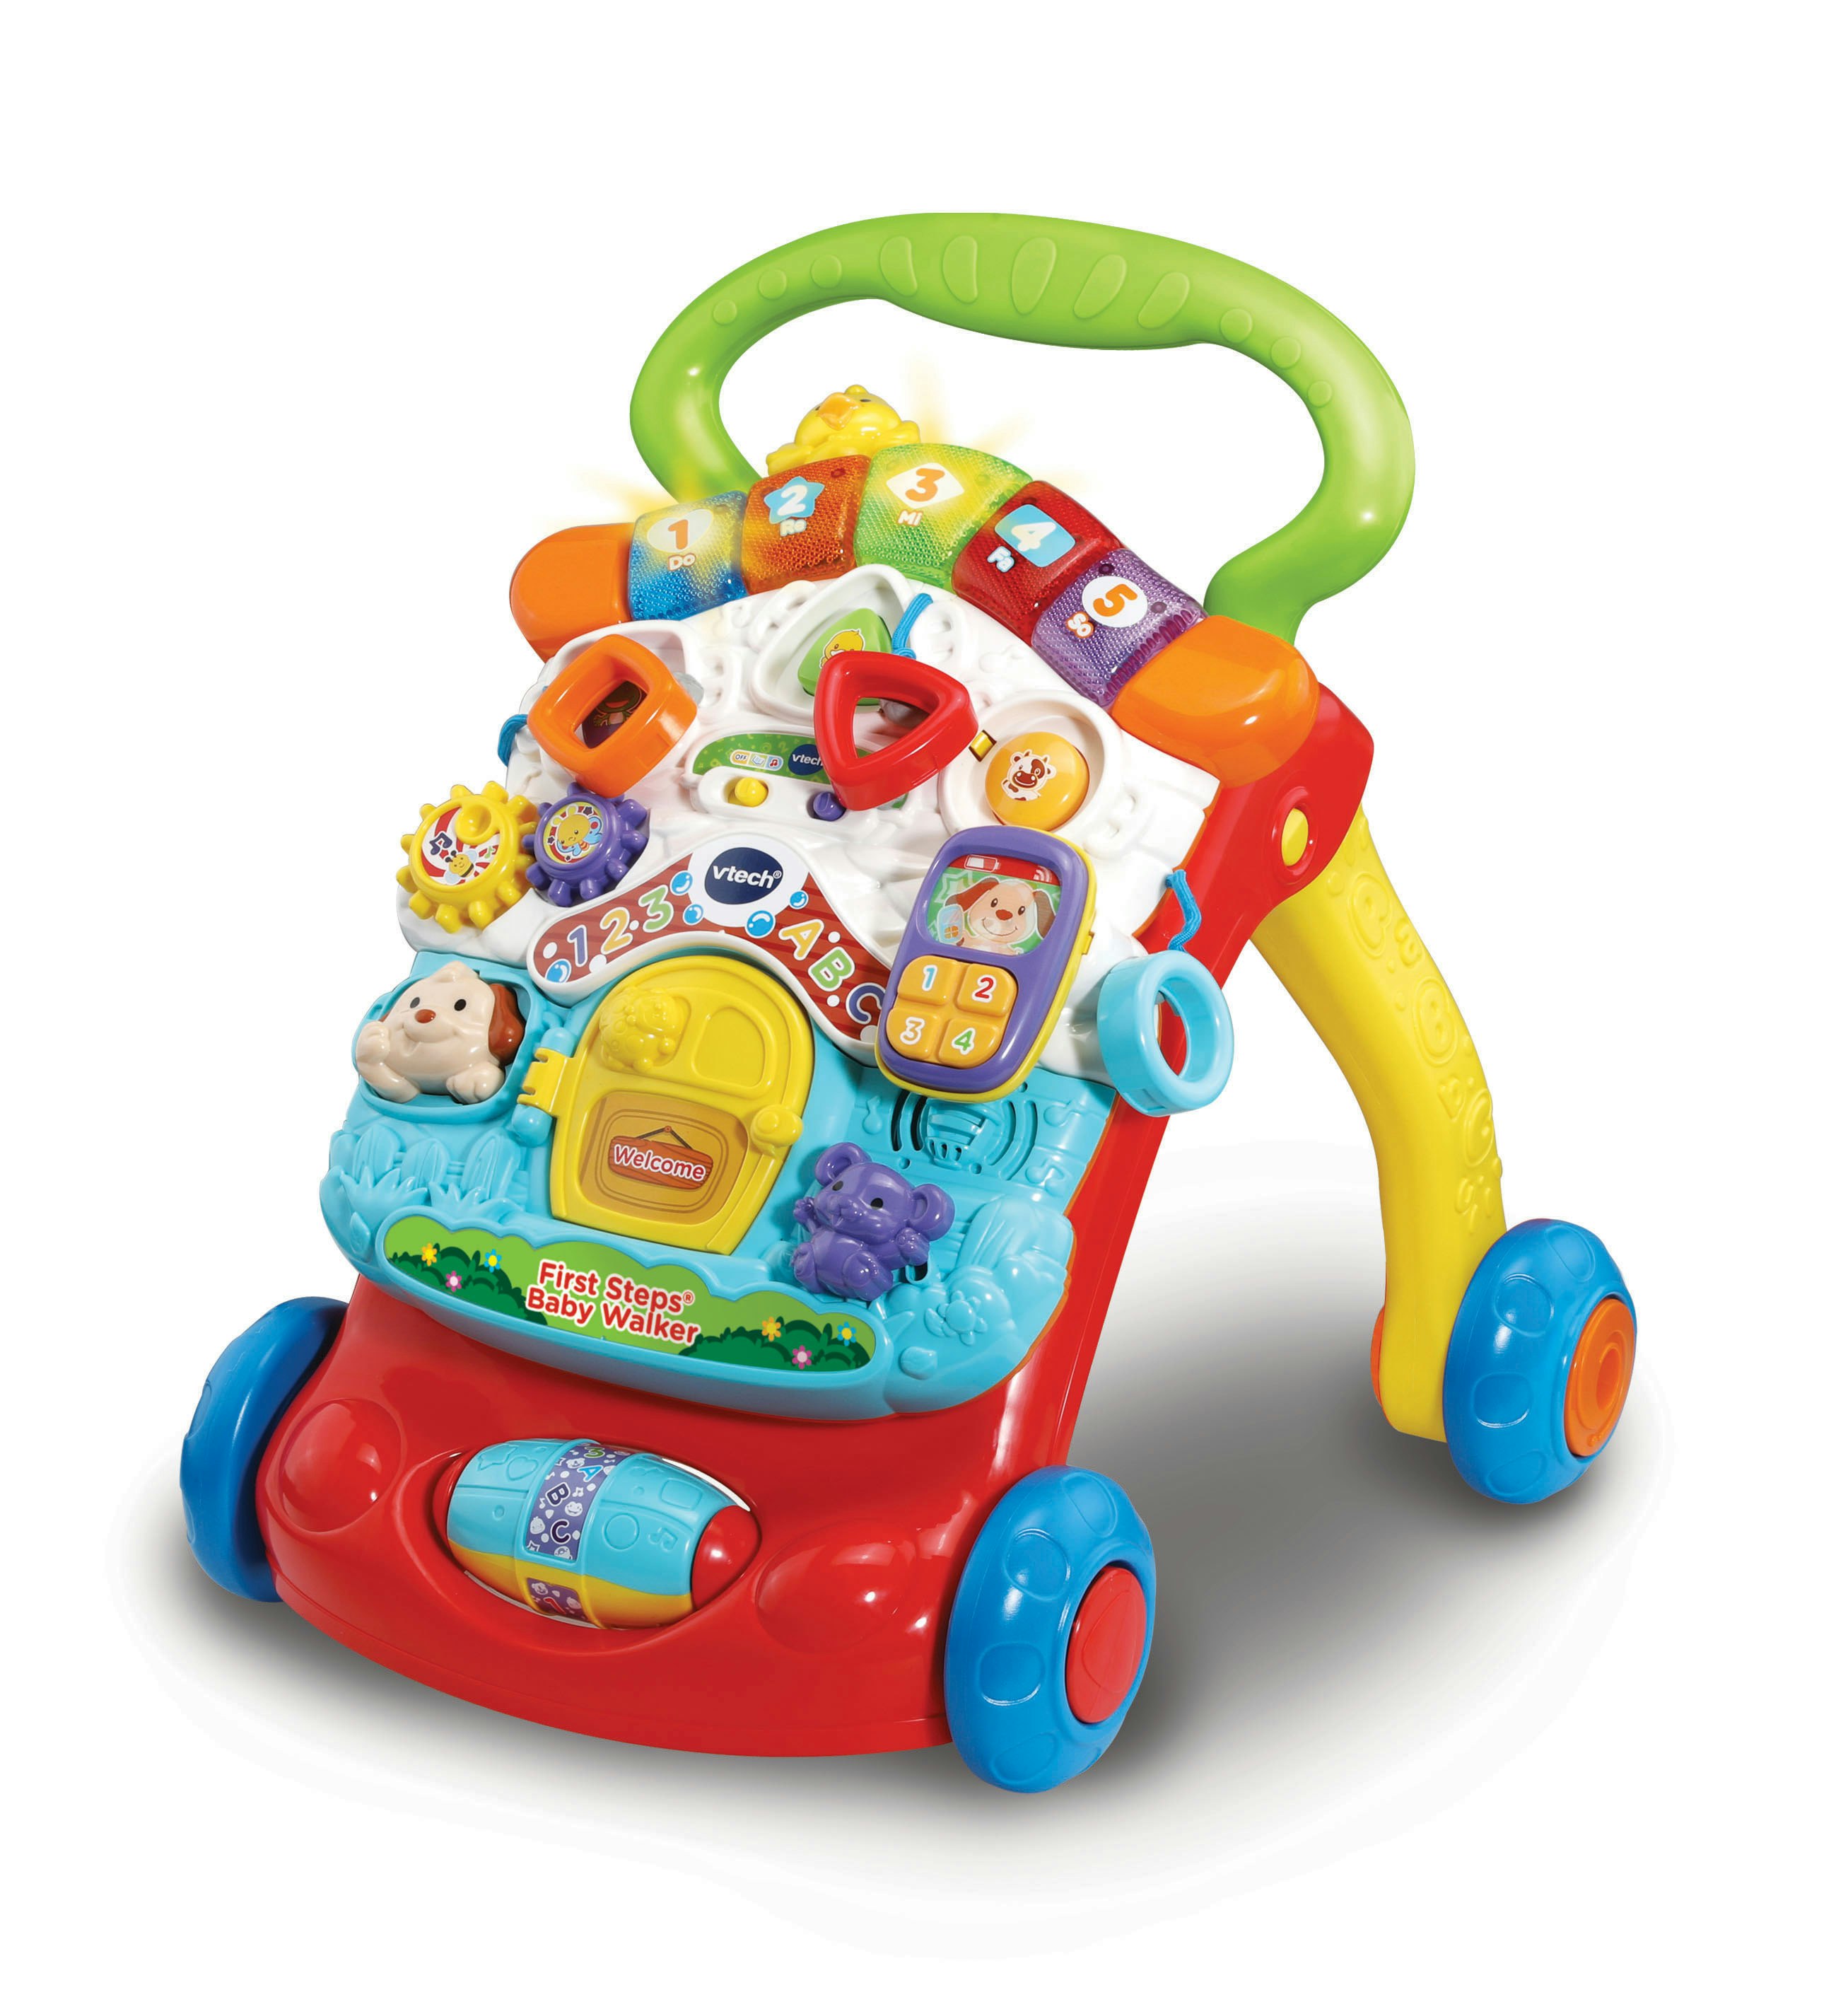 https://images.bauerhosting.com/affiliates/sites/12/motherandbaby/legacy/root/first-steps-baby-walker-vtech.jpg?ar=16%3A9&fit=crop&crop=top&auto=format&w=undefined&q=80